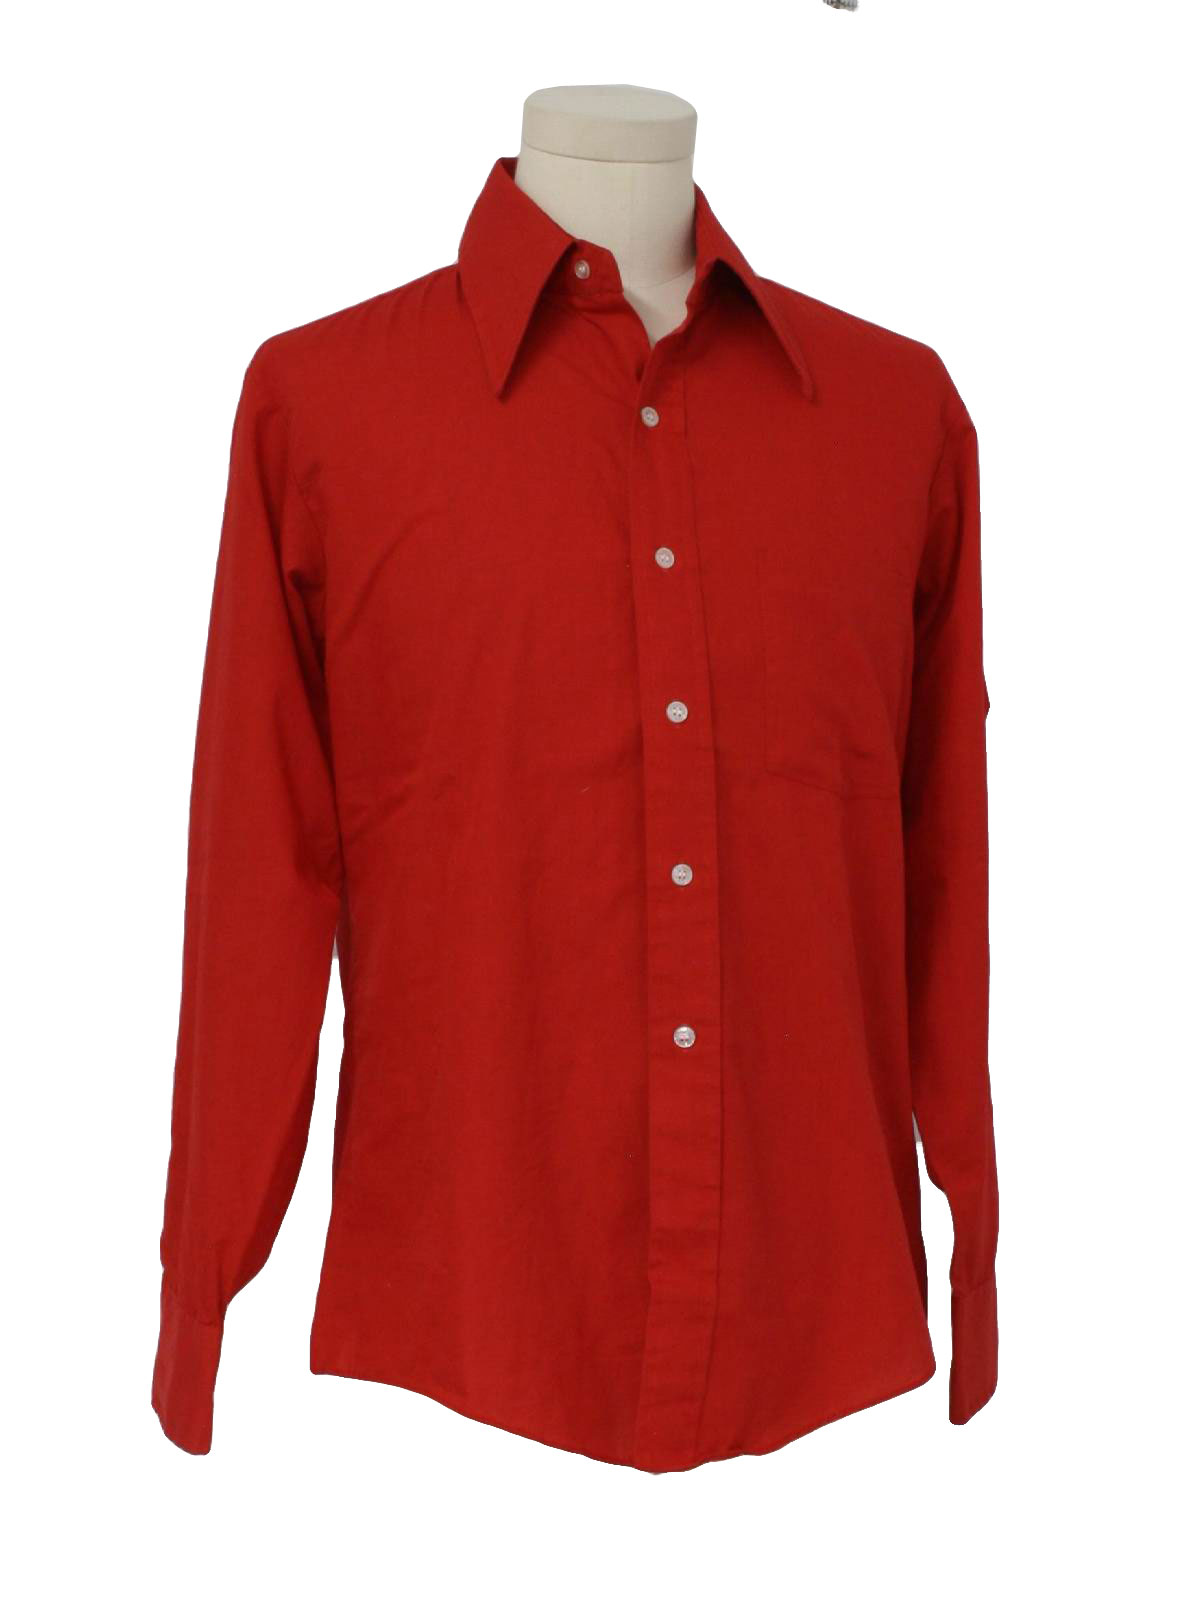 1970's Shirt (Sears): 70s -Sears- Mens cherry red cotton and polyester ...